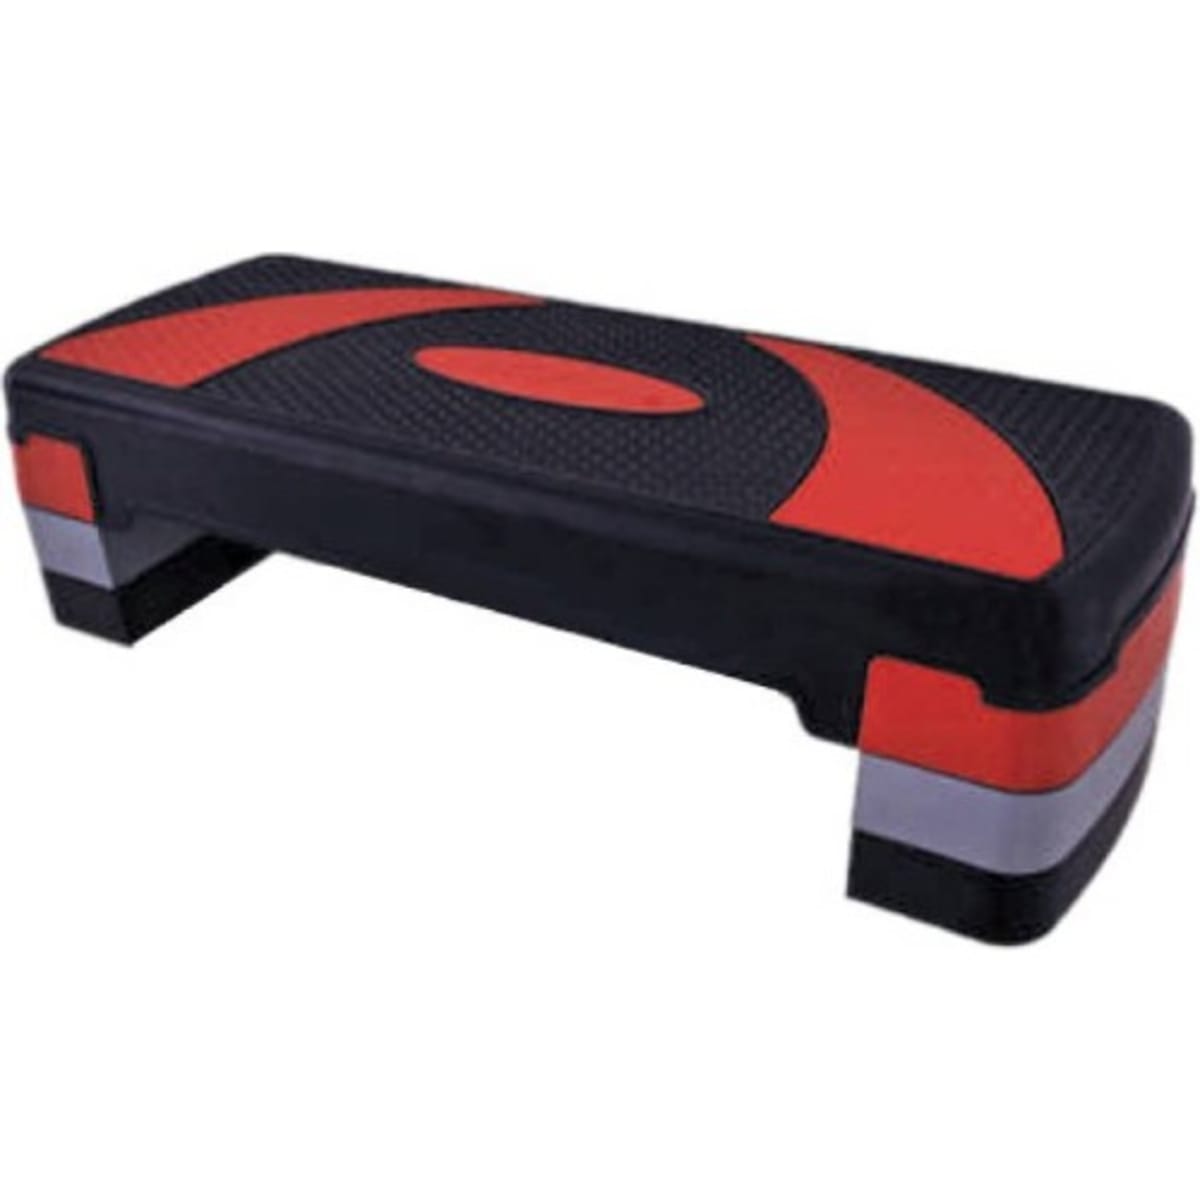 Aerobic Step Board For Body Exercises | Konga Online Shopping